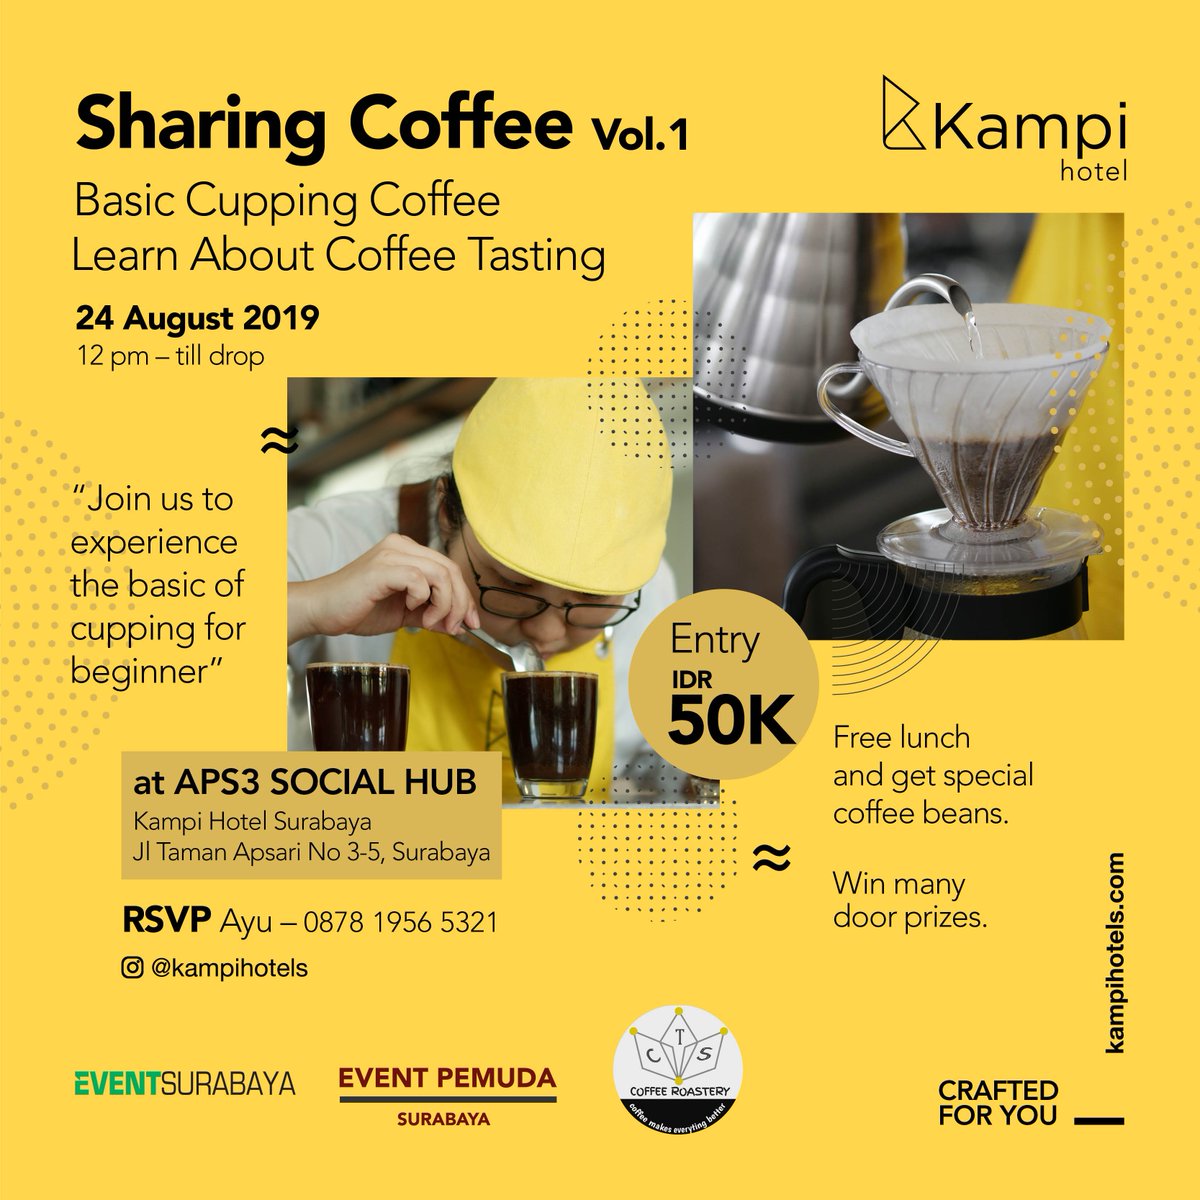 Event Surabaya On Twitter Sharing Coffee Vol 1 About